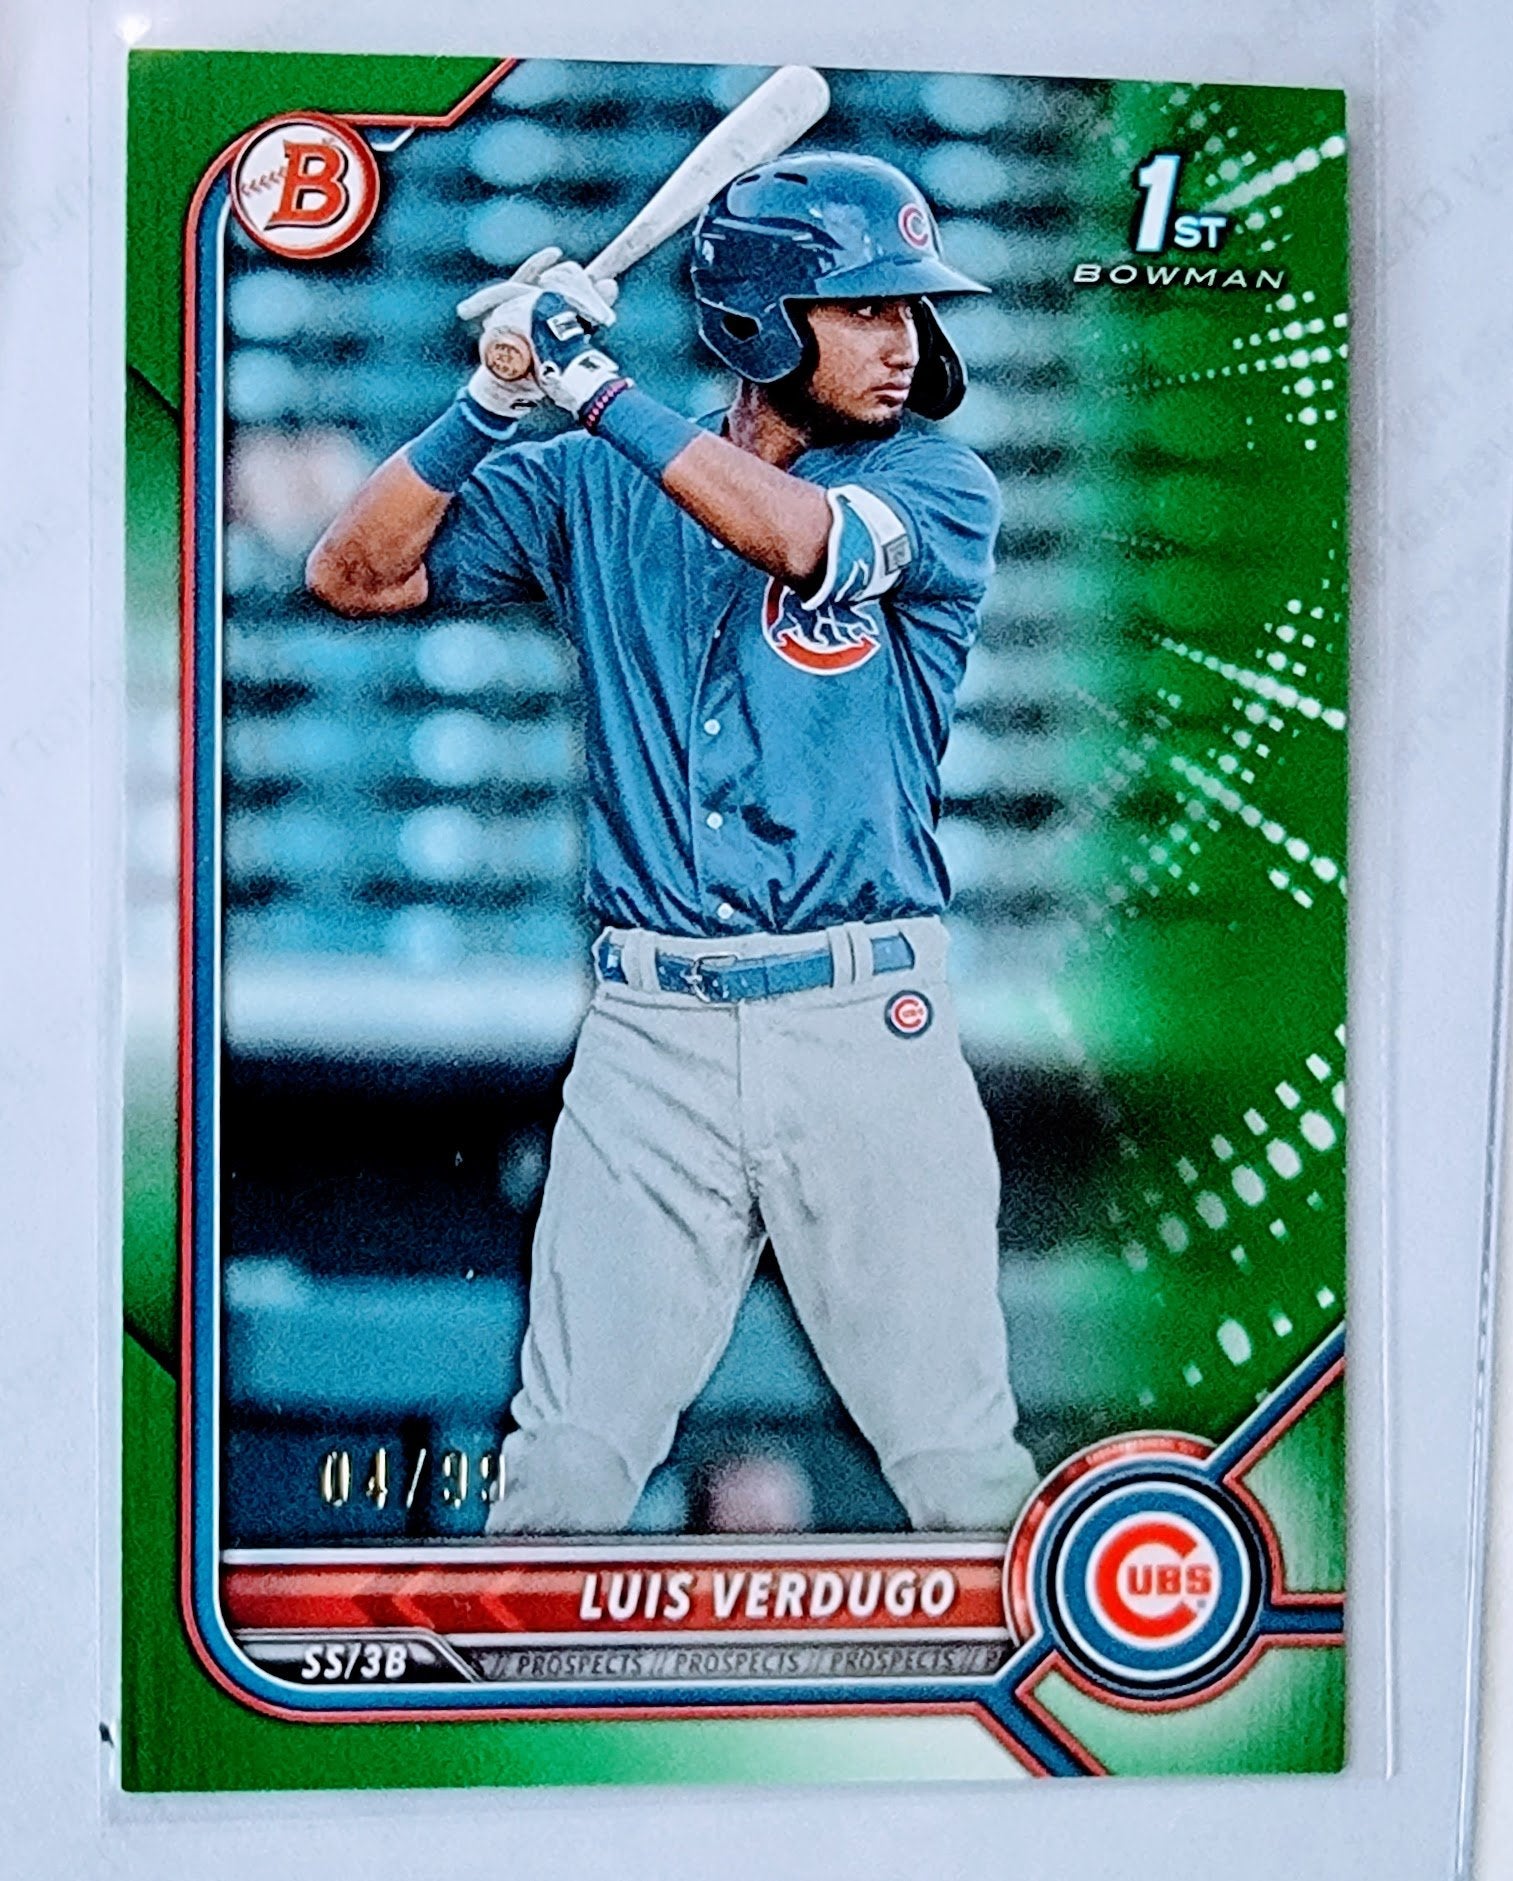 2022 Bowman Luis Verdugo 1st on Bowman Chicago Cubs Prospect #'d/99 Green Baseball Trading Card GRB1 simple Xclusive Collectibles   